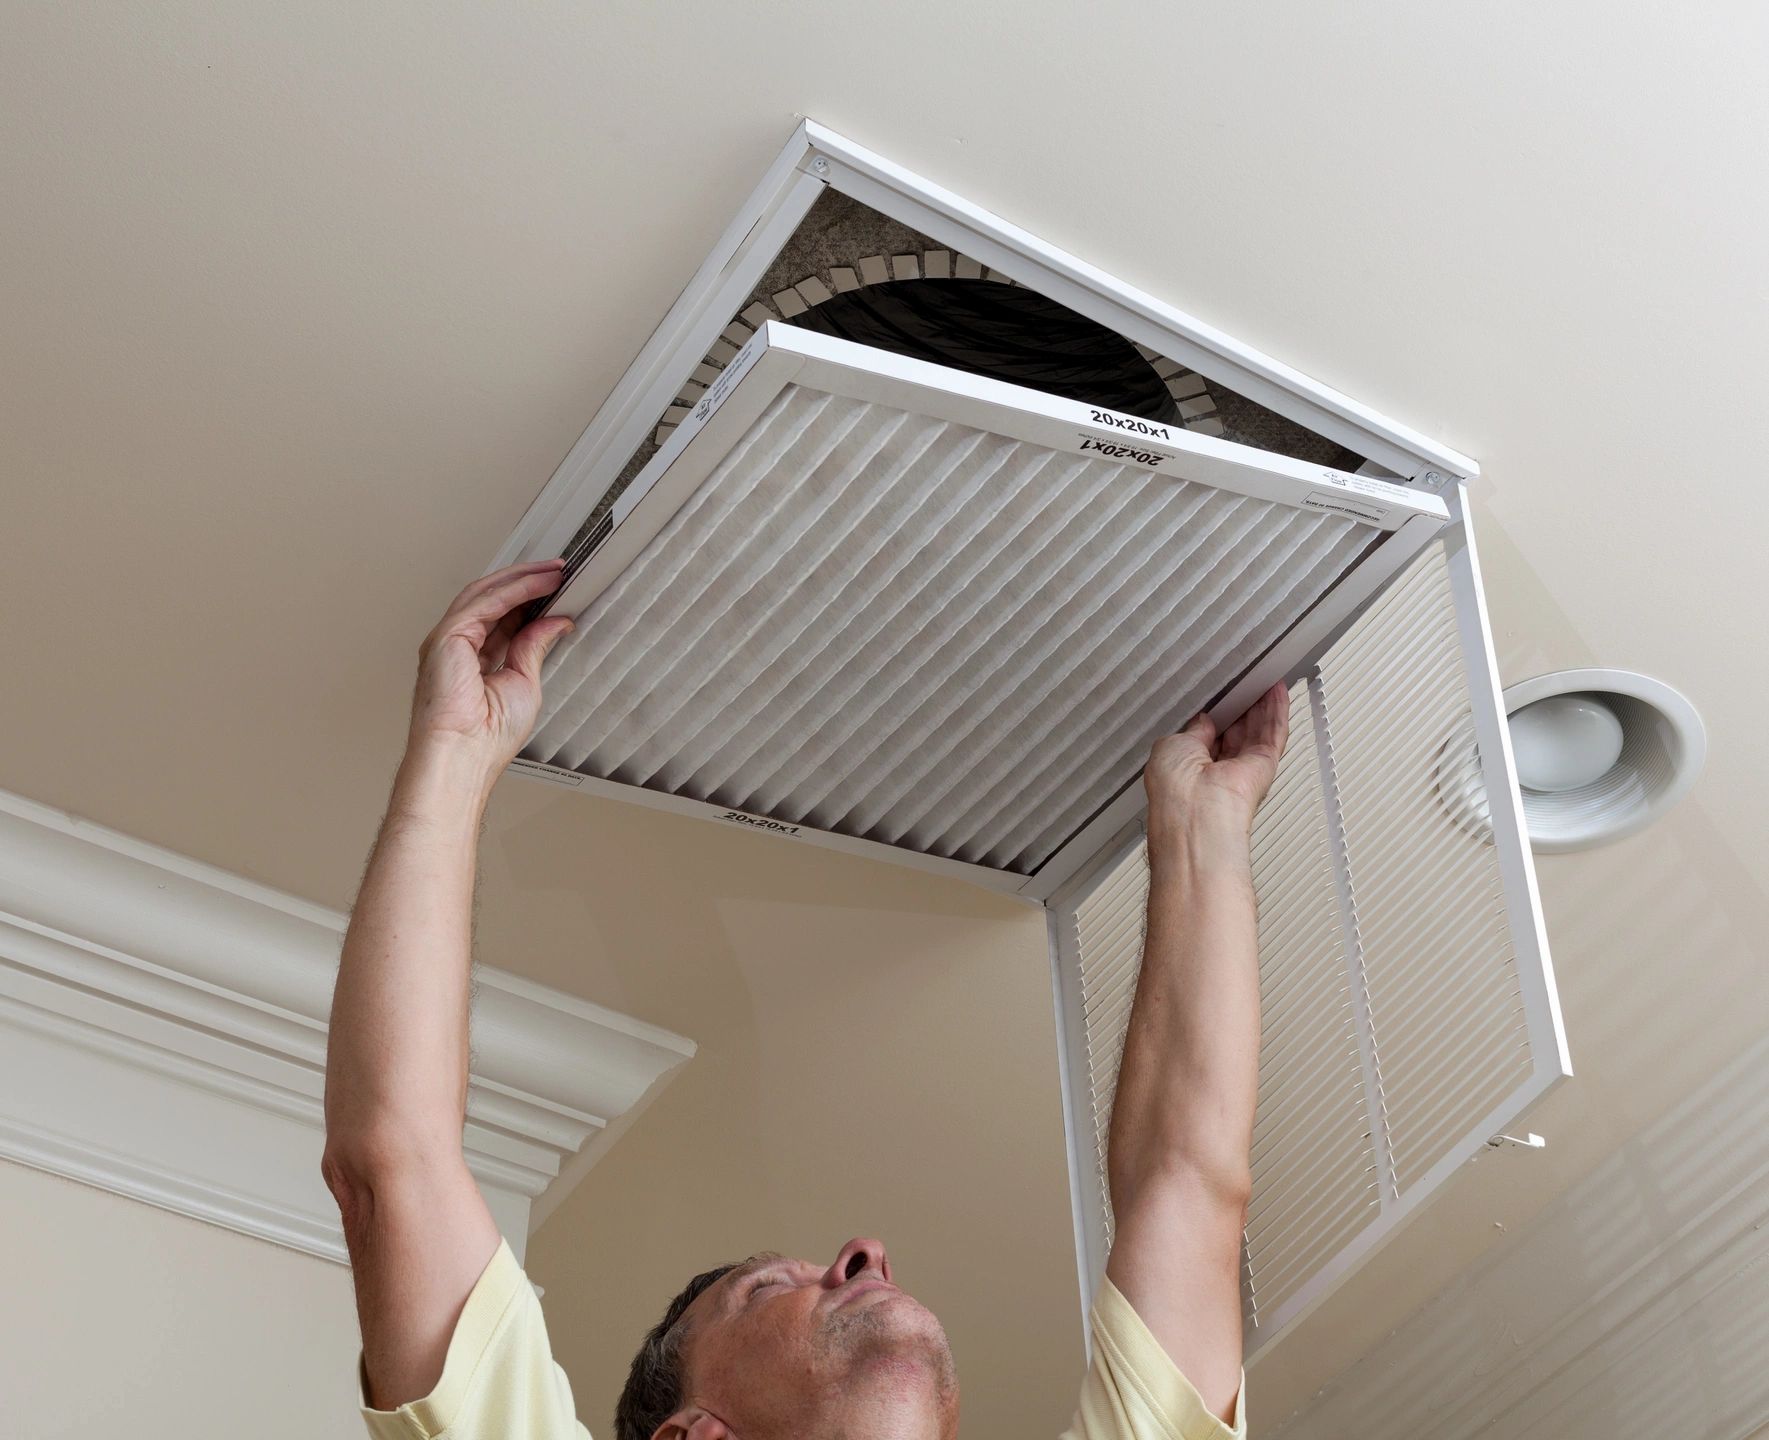 Filter replacement, air conditioning maintenance, a/c service, heater repair, filter media, heating